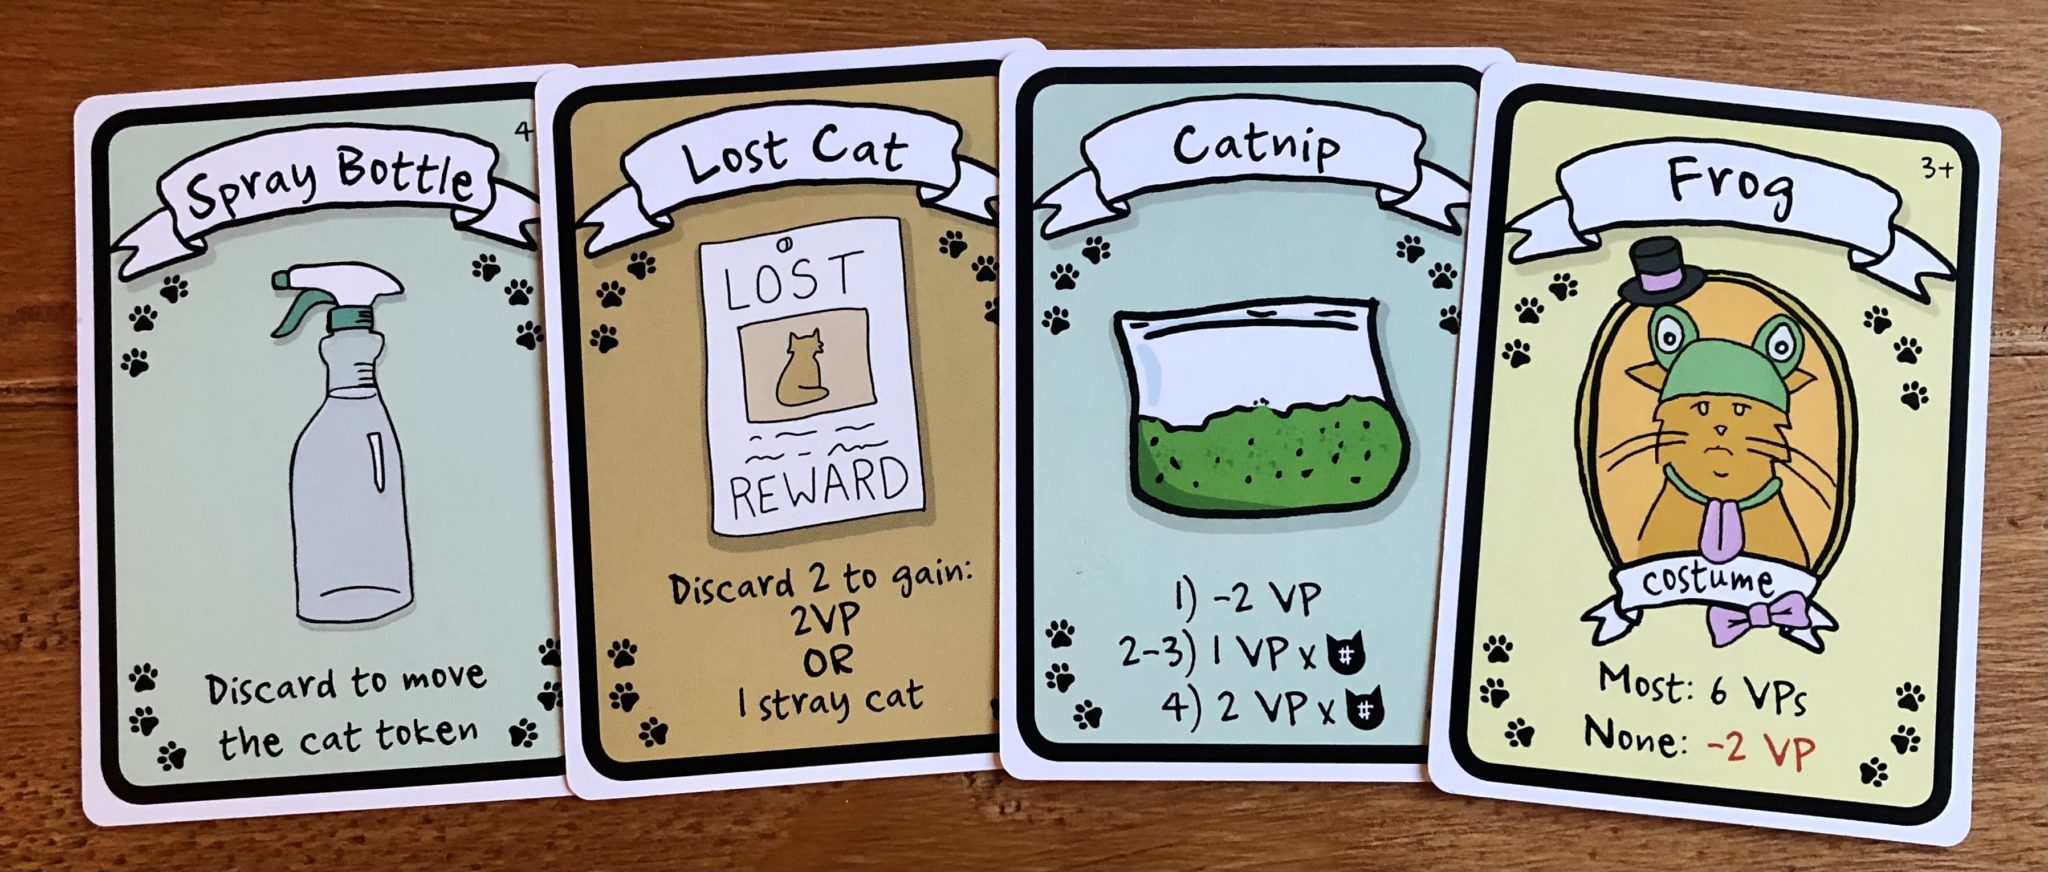 cards in cat lady card game